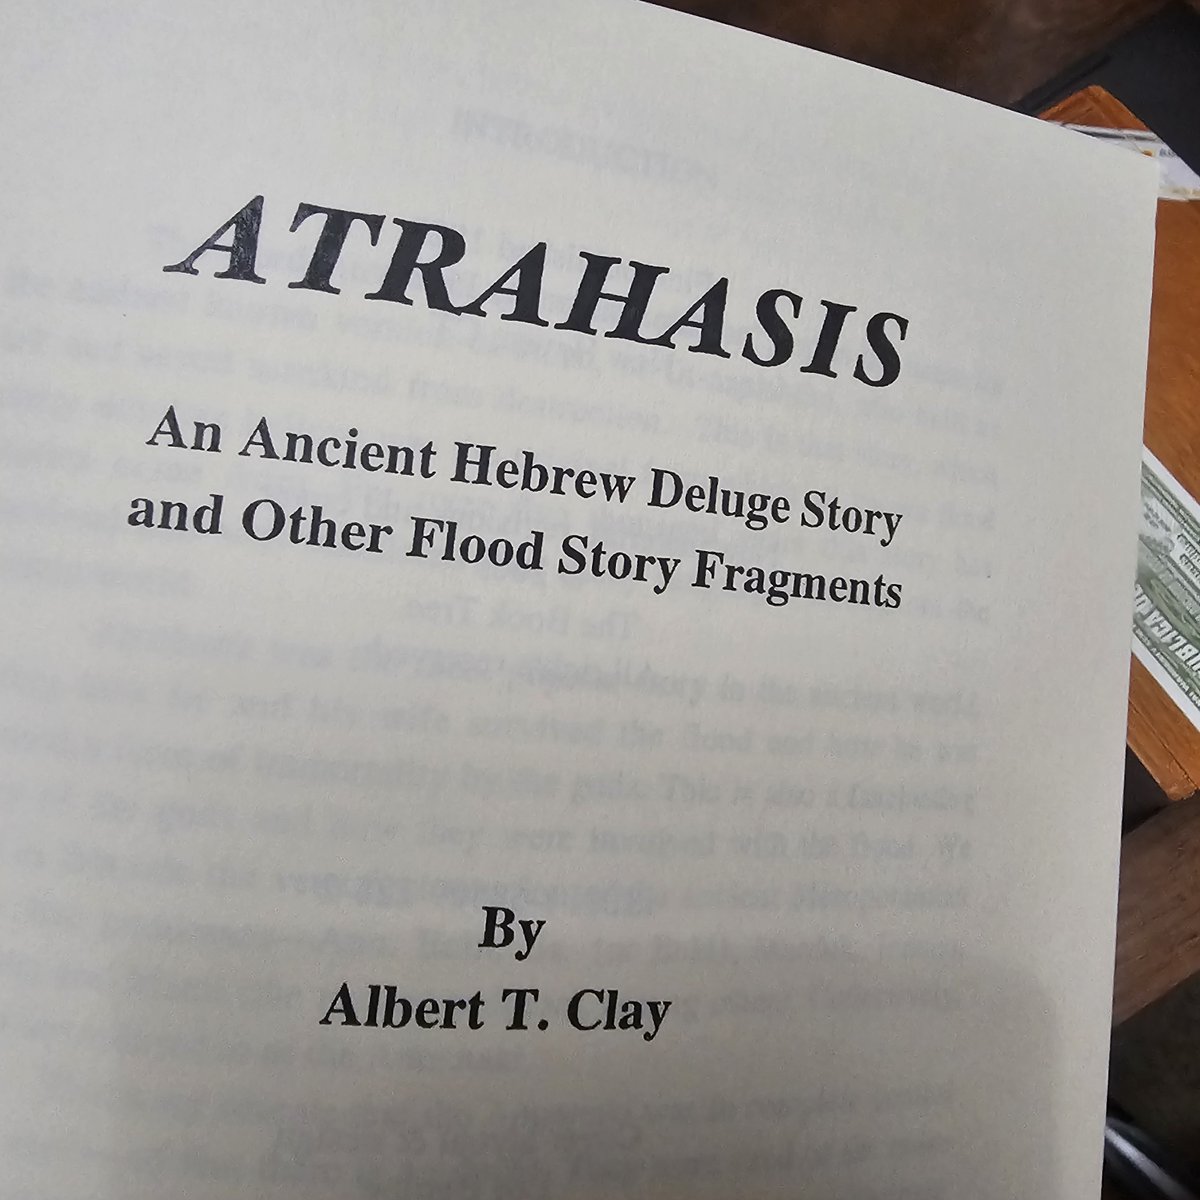 The oldest version of the Atrahasis Epic contains no evidence that it was written in the Sumerian language. In fact, not only does the Akkadian preserve Amorite words left untranslated, but the gods and heroes and many words in the narratives are Amorite.   

Albert T. Clay in